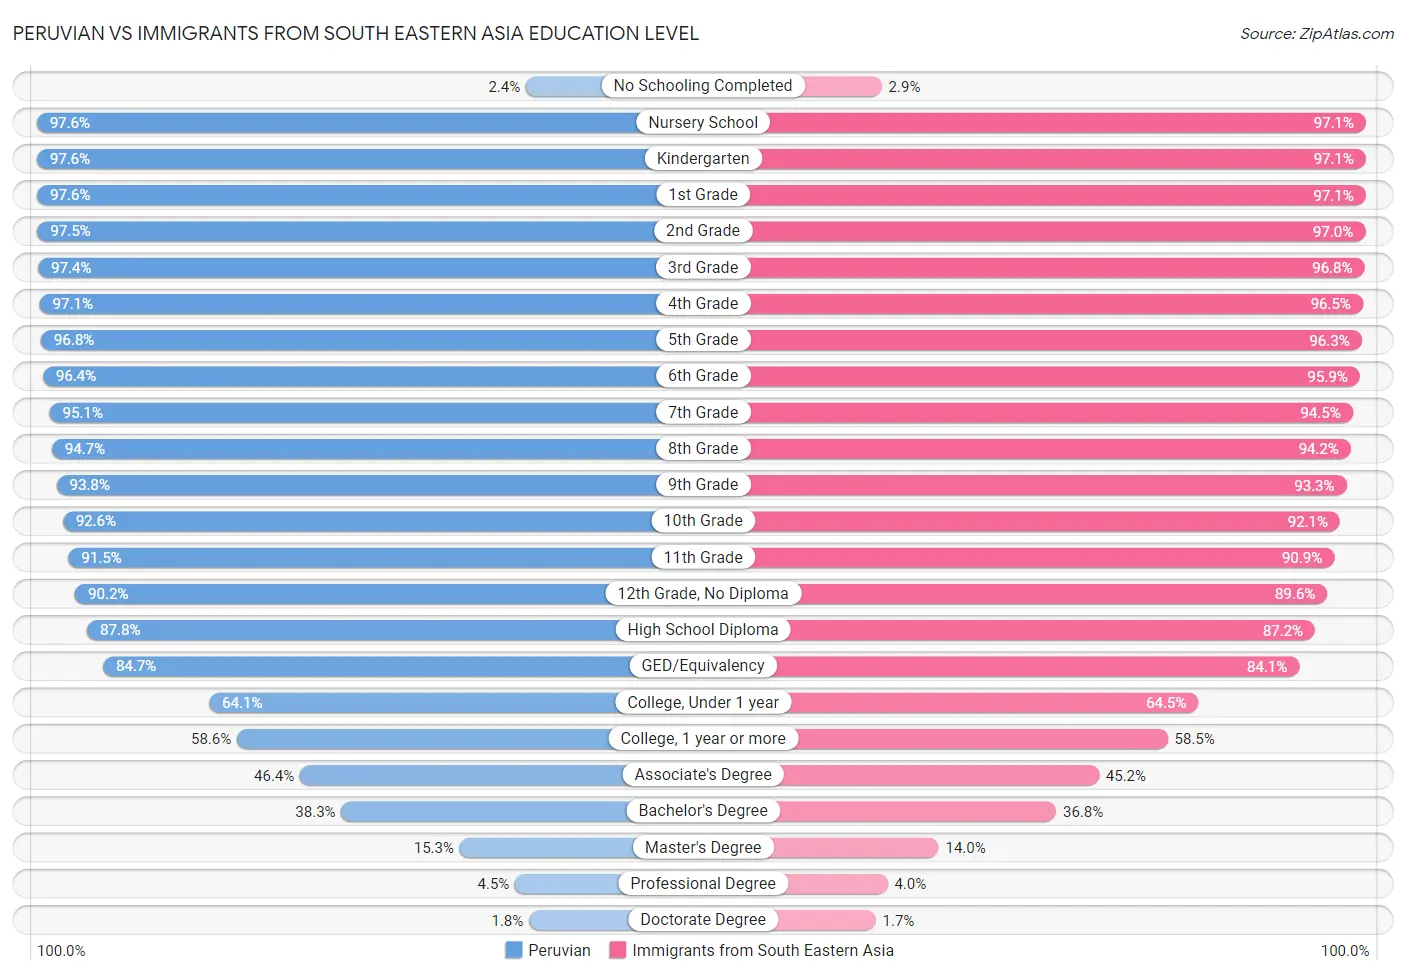 Peruvian vs Immigrants from South Eastern Asia Education Level